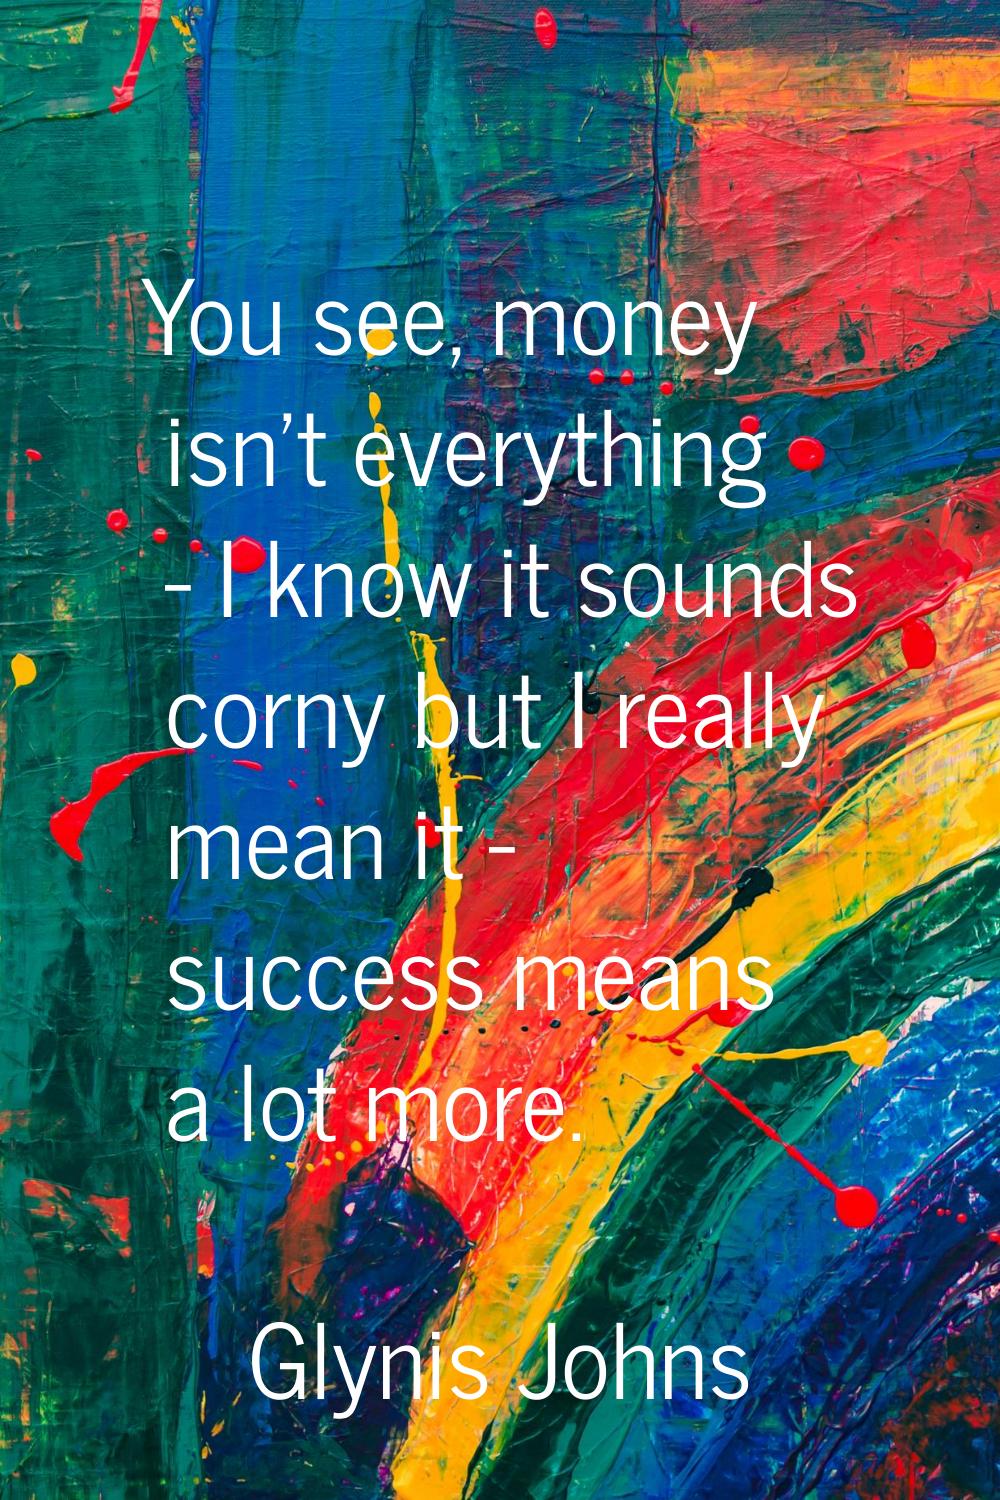 You see, money isn't everything - I know it sounds corny but I really mean it - success means a lot